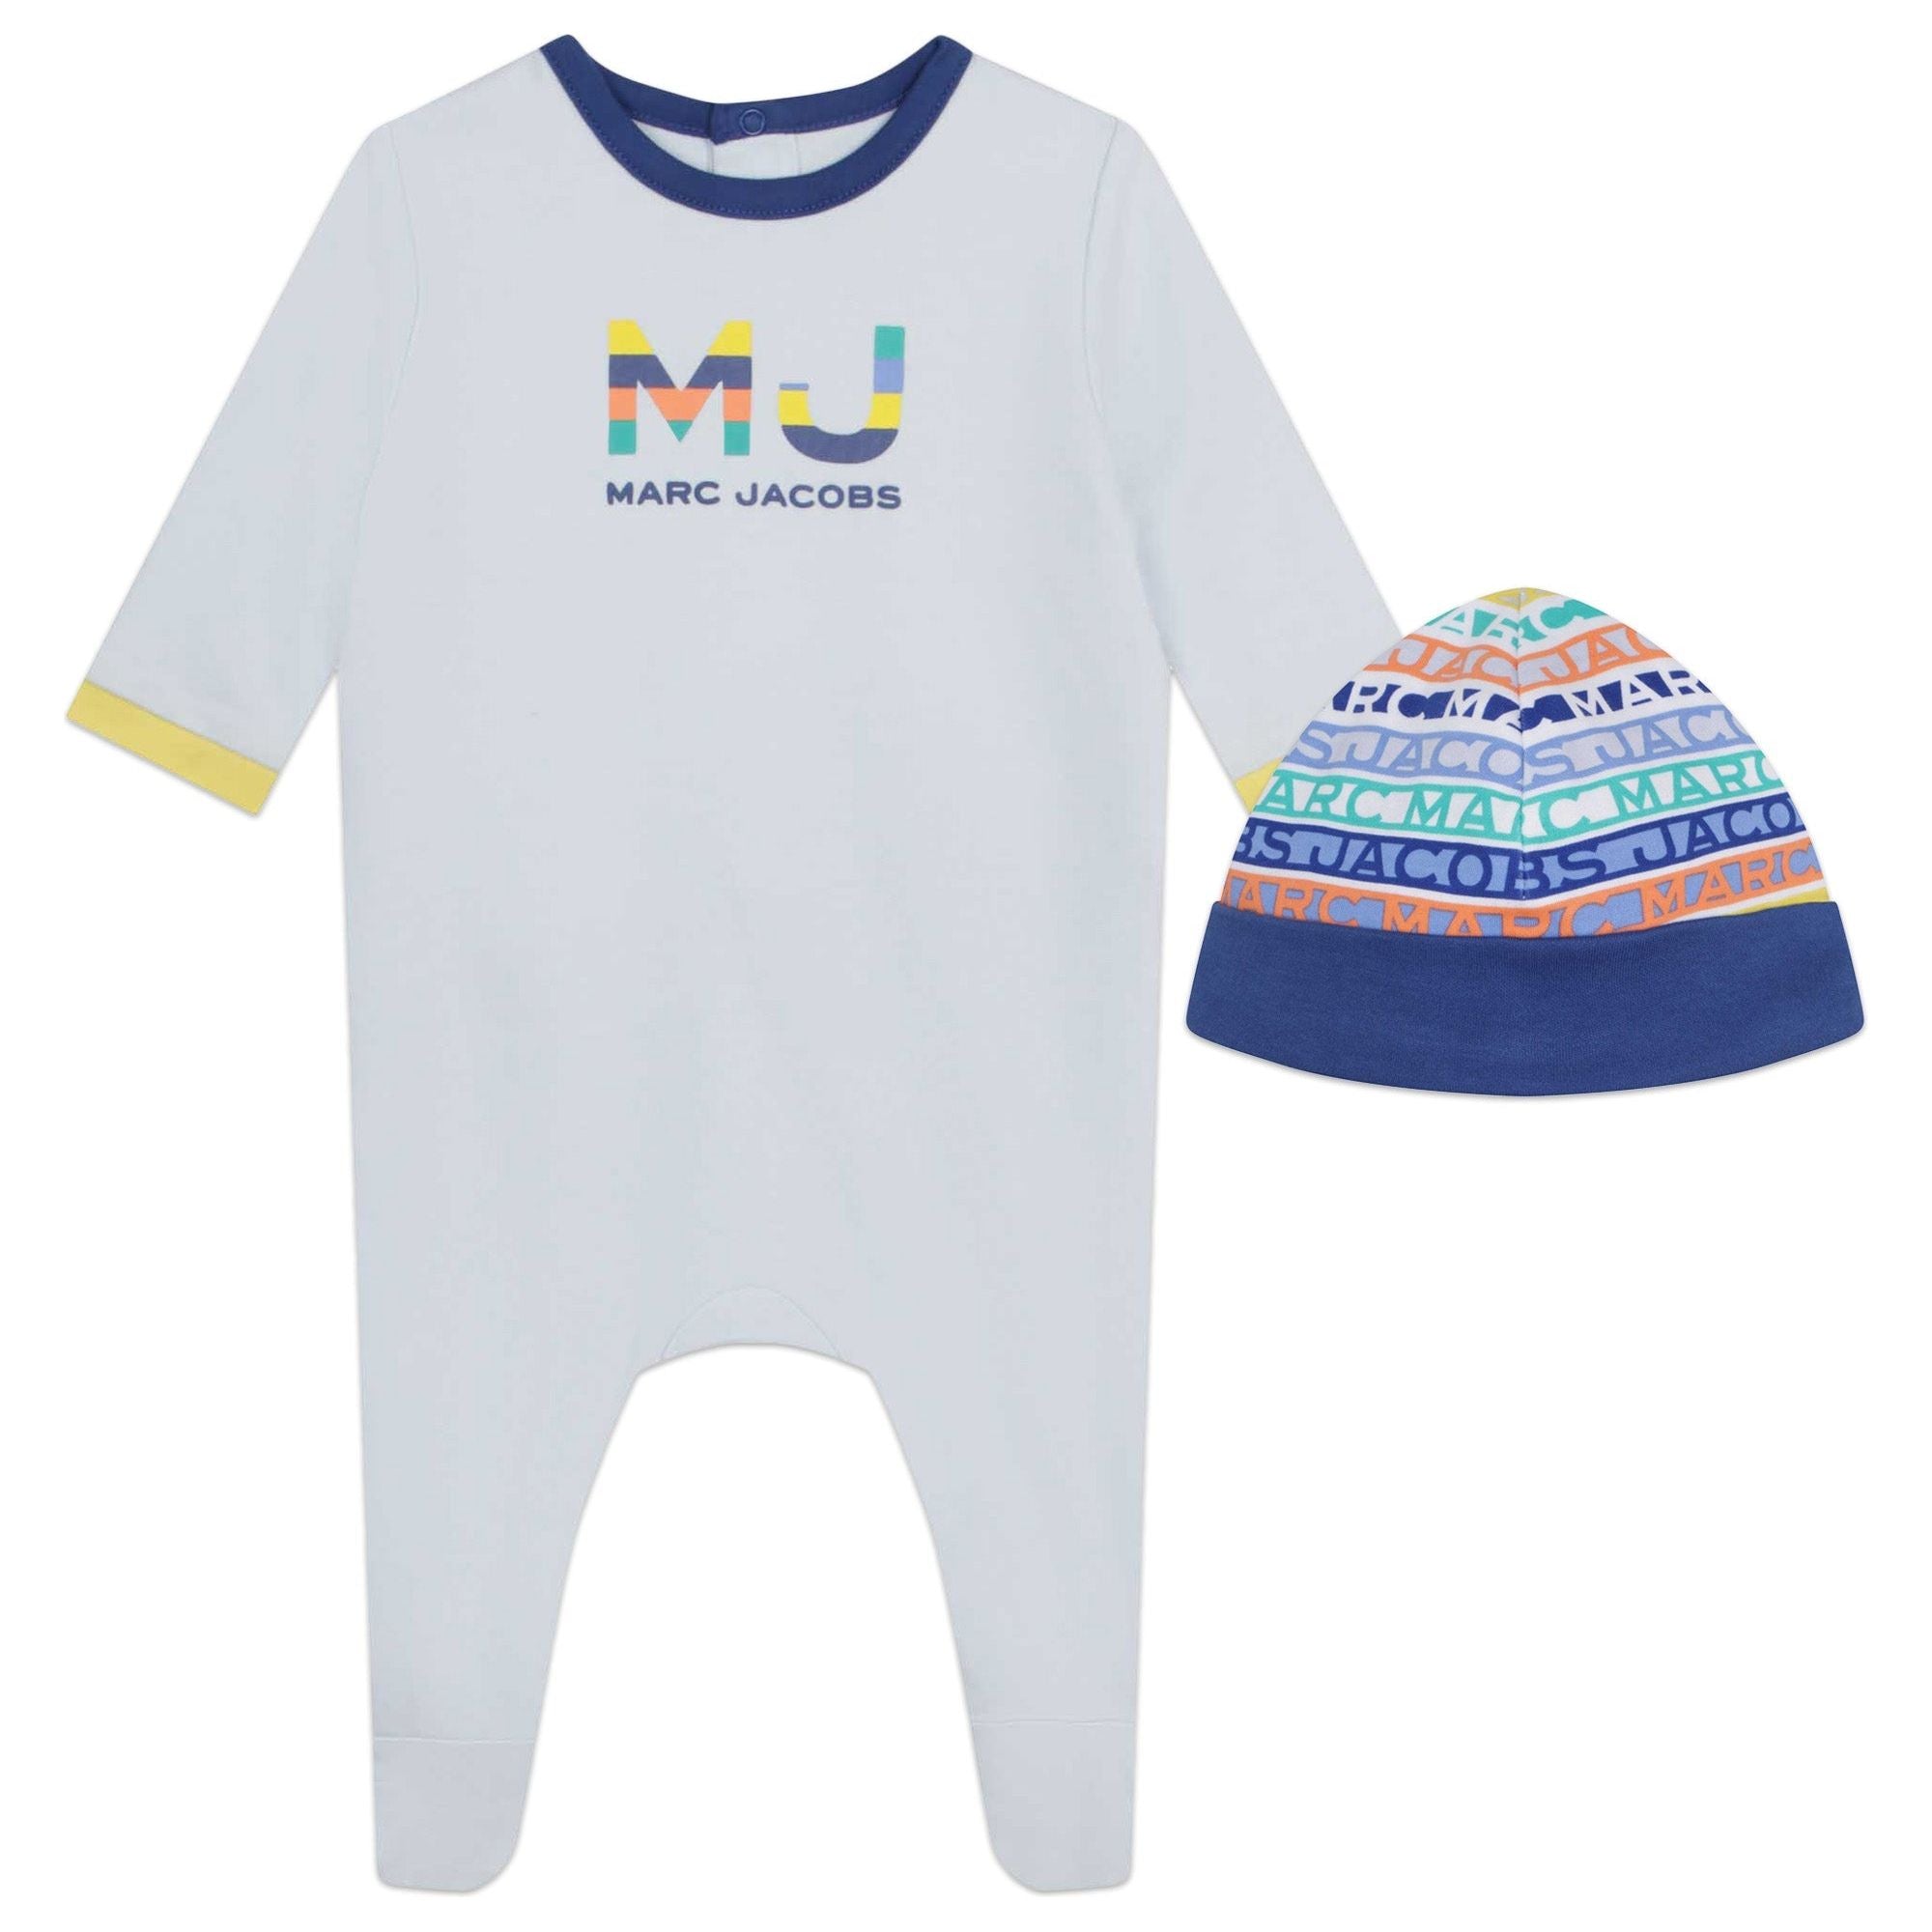 EMBROIDERED LOGO OVERALL SET